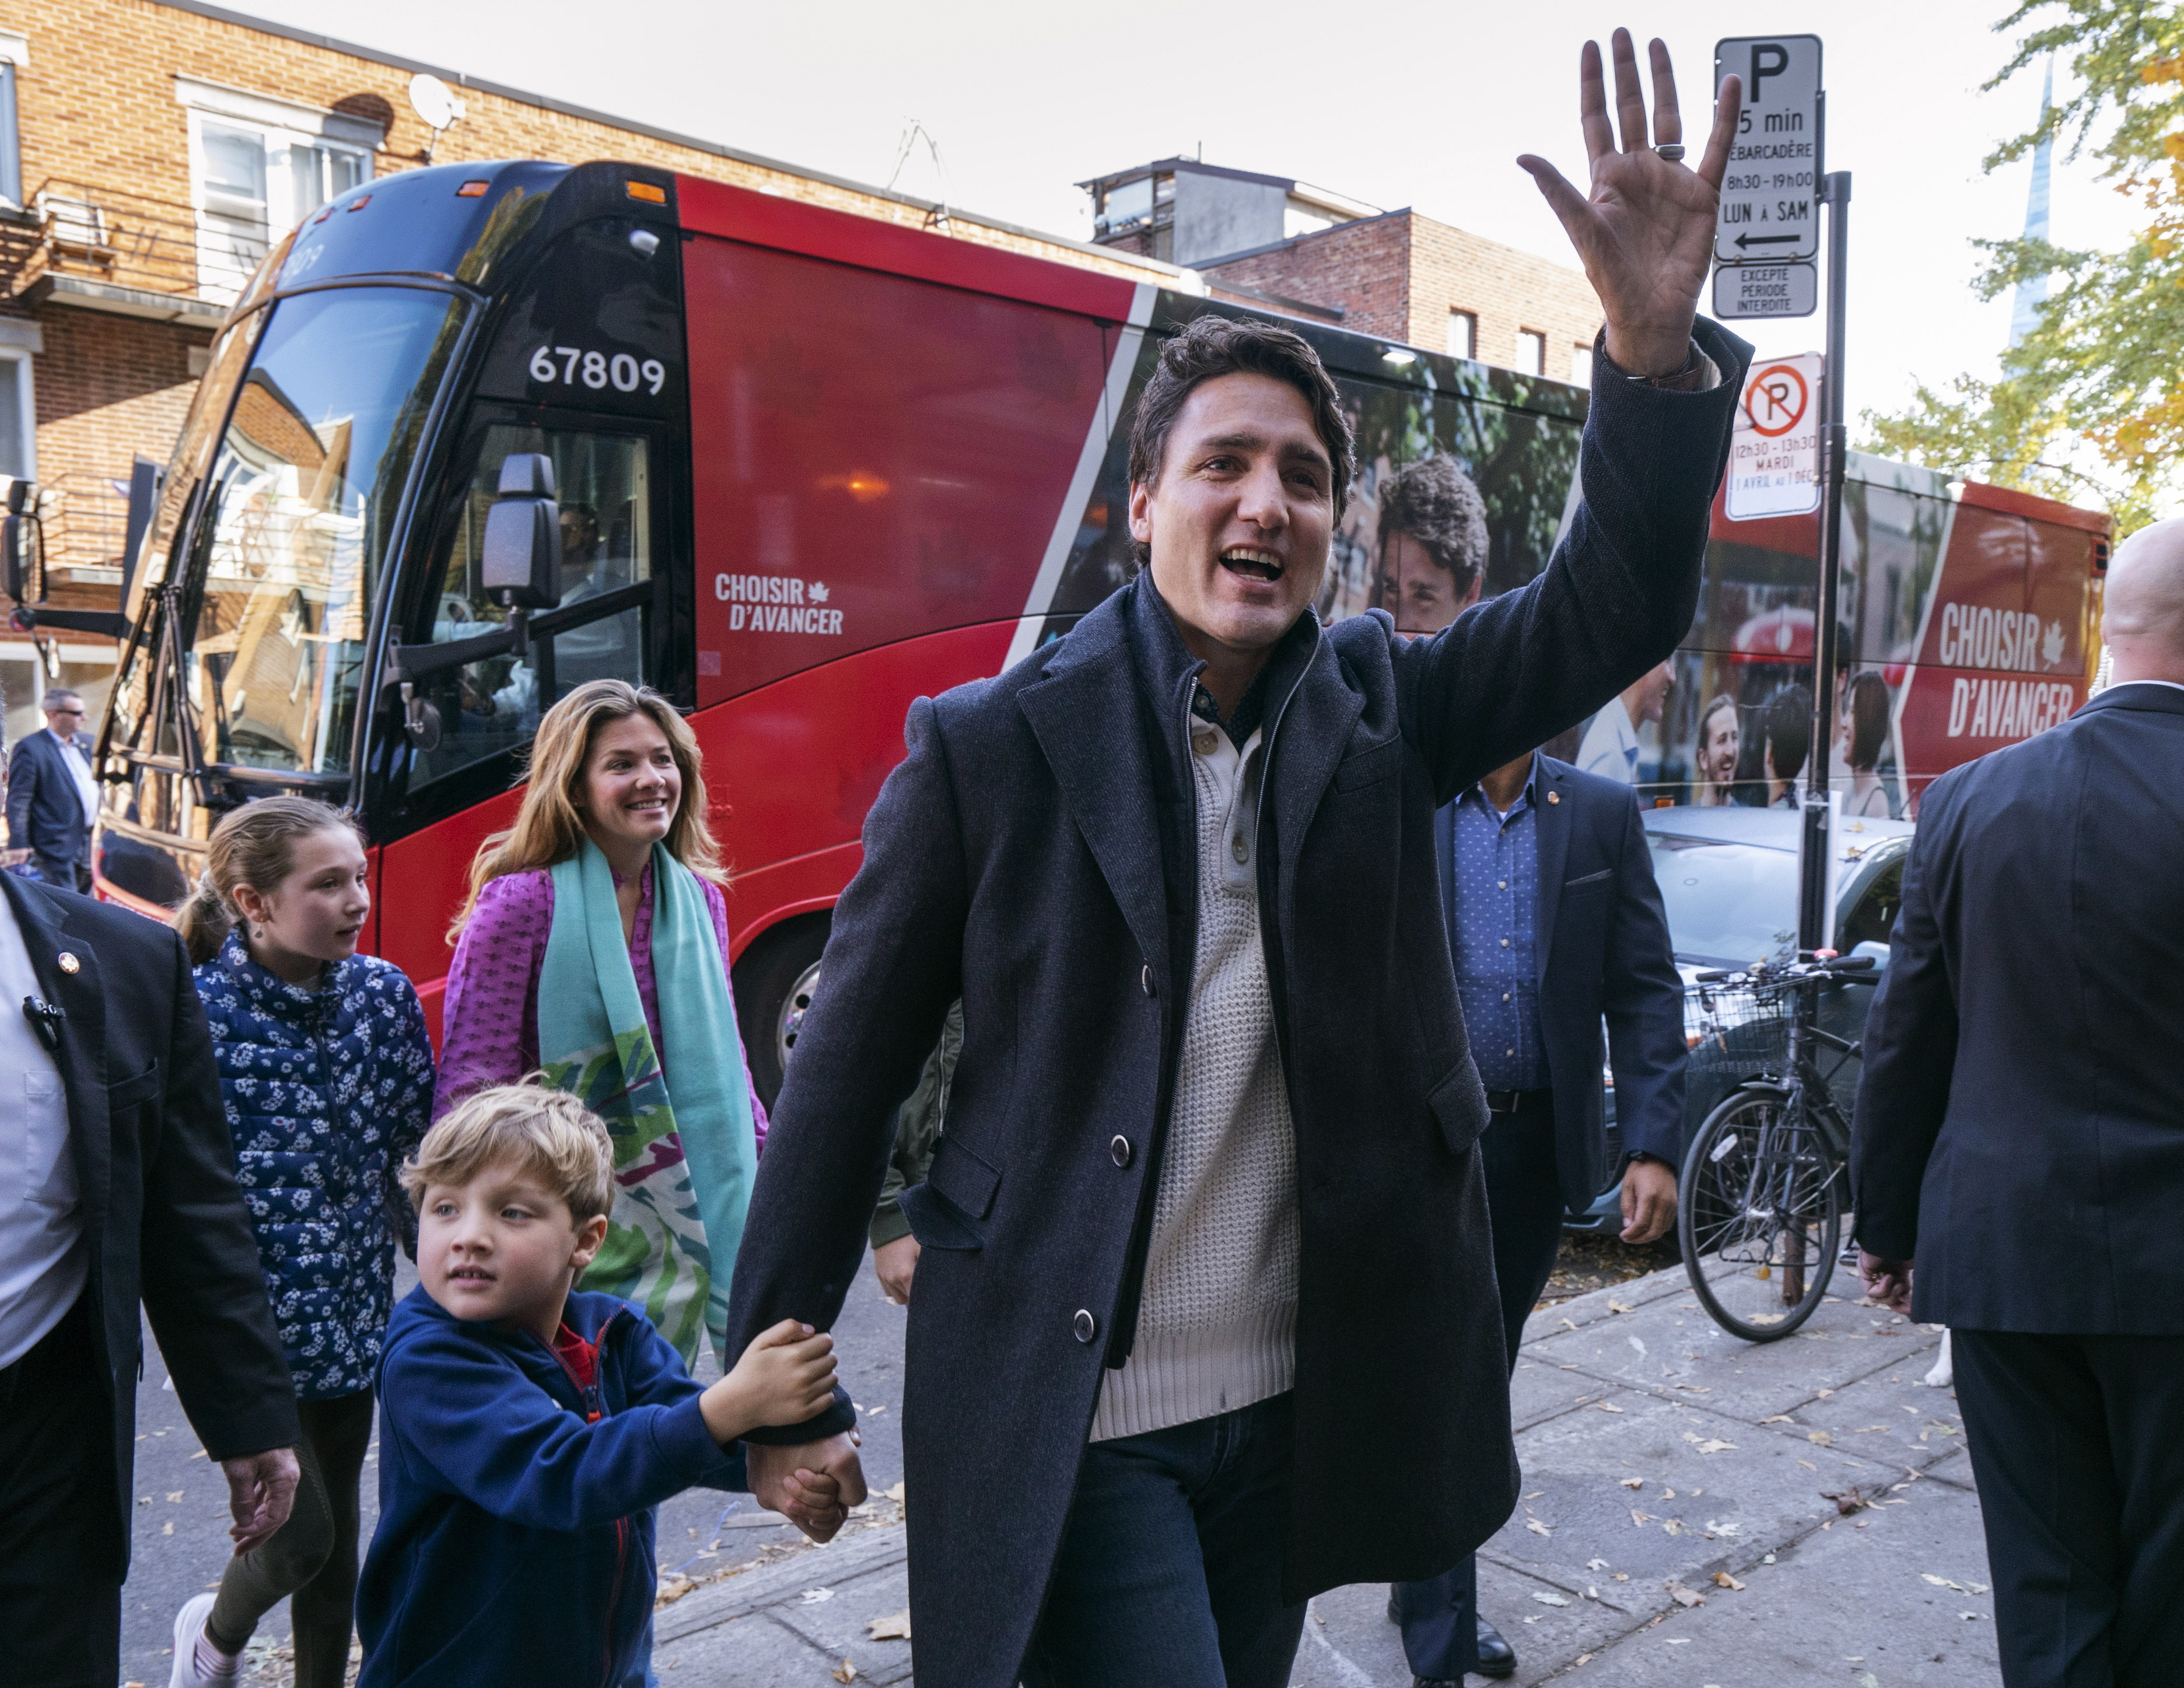 Canadian Prime Minister and Liberal leader Justin Trudeau arrives at the poling station with his son Hadrian, his wife Sophie and daughter Ella-Grace in Montreal, Monday, Oct. 21, 2019. (Paul Chiasson/The Canadian Press via AP)